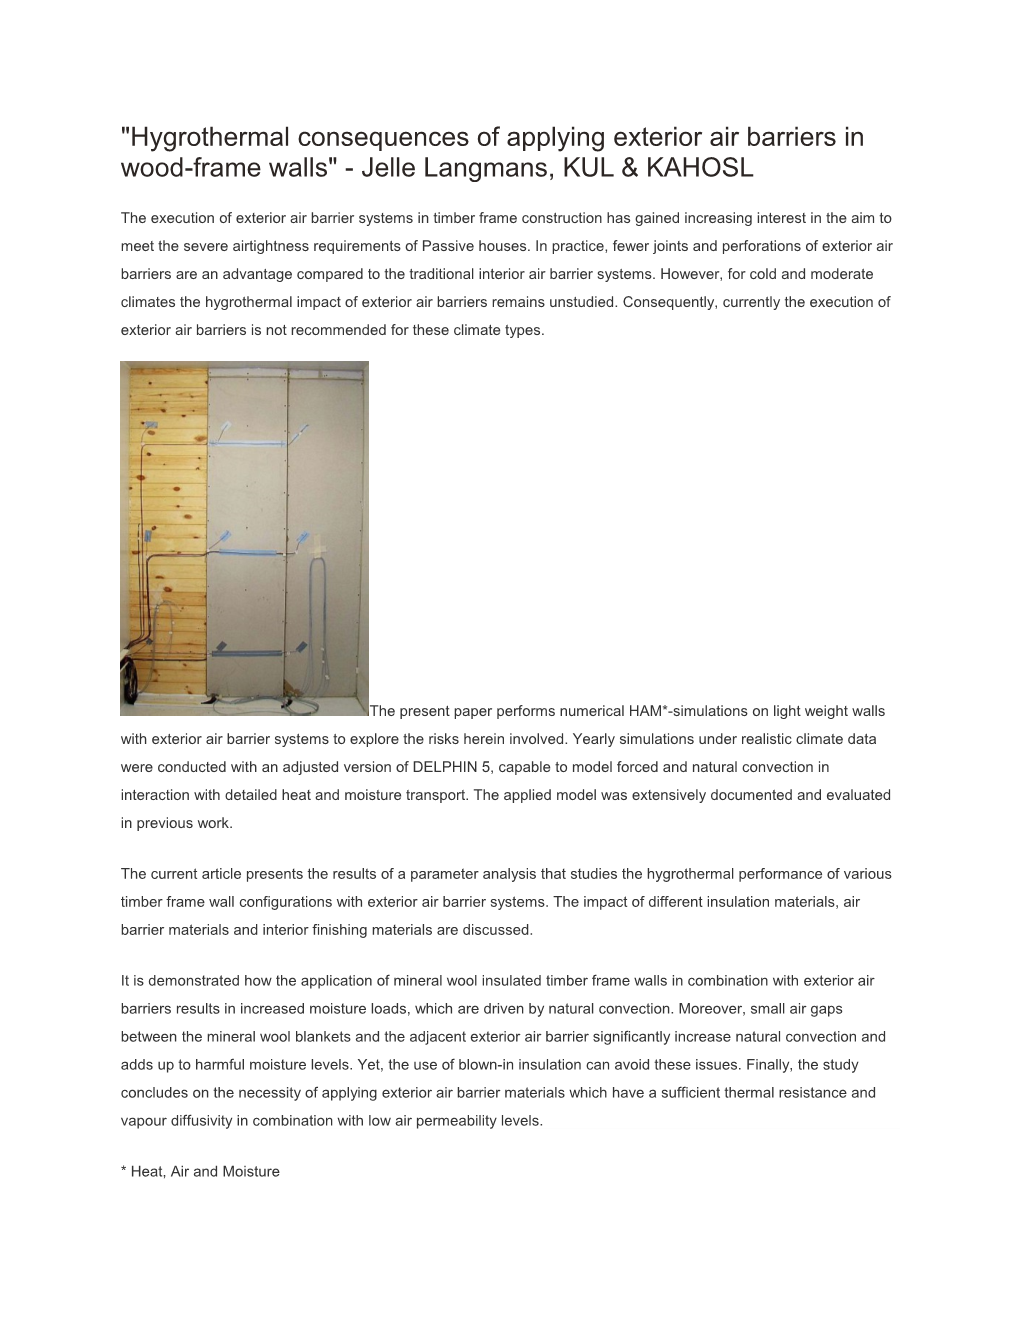 Hygrothermal Consequences of Applying Exterior Air Barriers in Wood-Frame Walls - Jelle